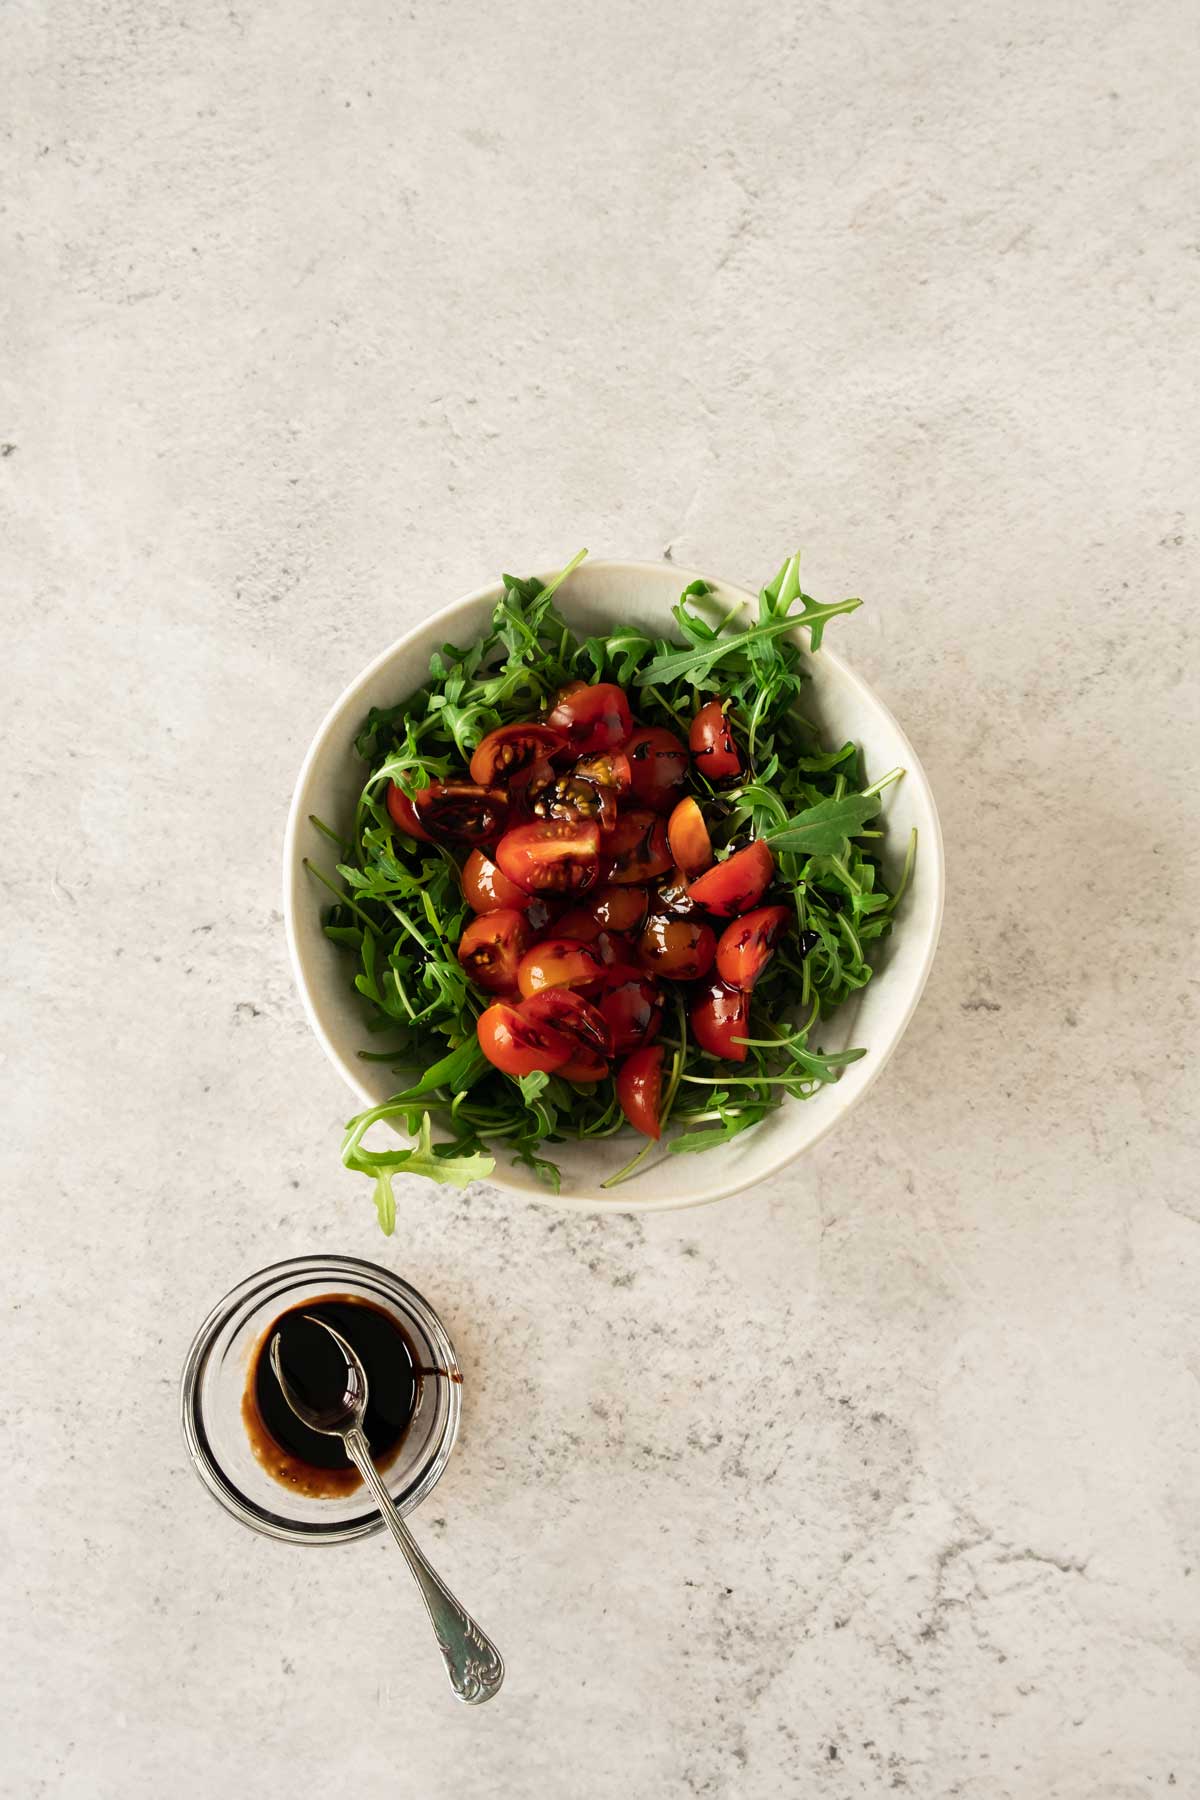 A bowl of arugula and cherry tomato salad with a side of balsamic dressing on a light surface.